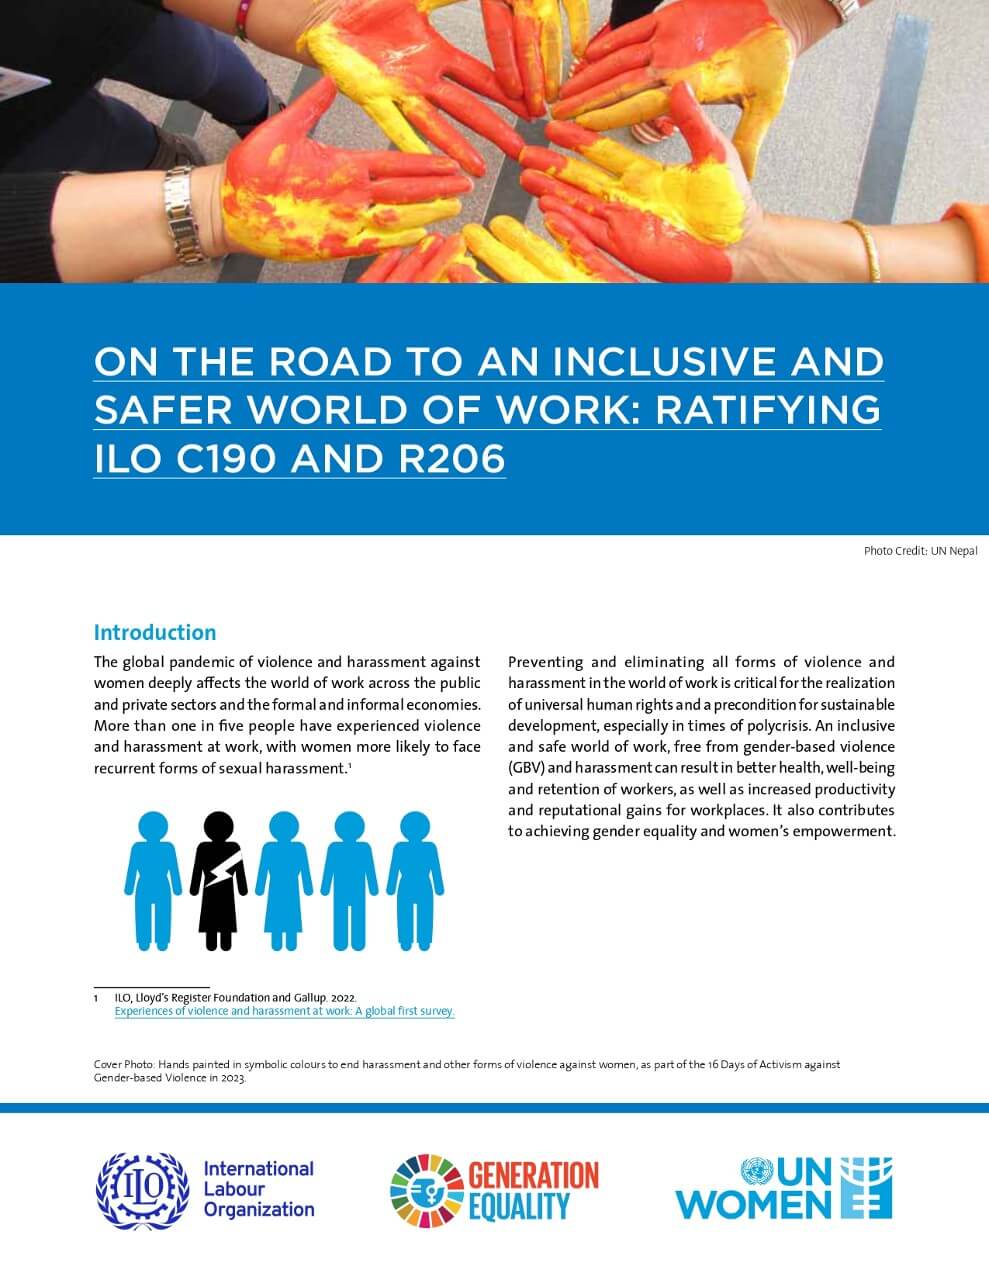 On the road to an inclusive and safer world of work: Ratifying ILO C190 AND R206